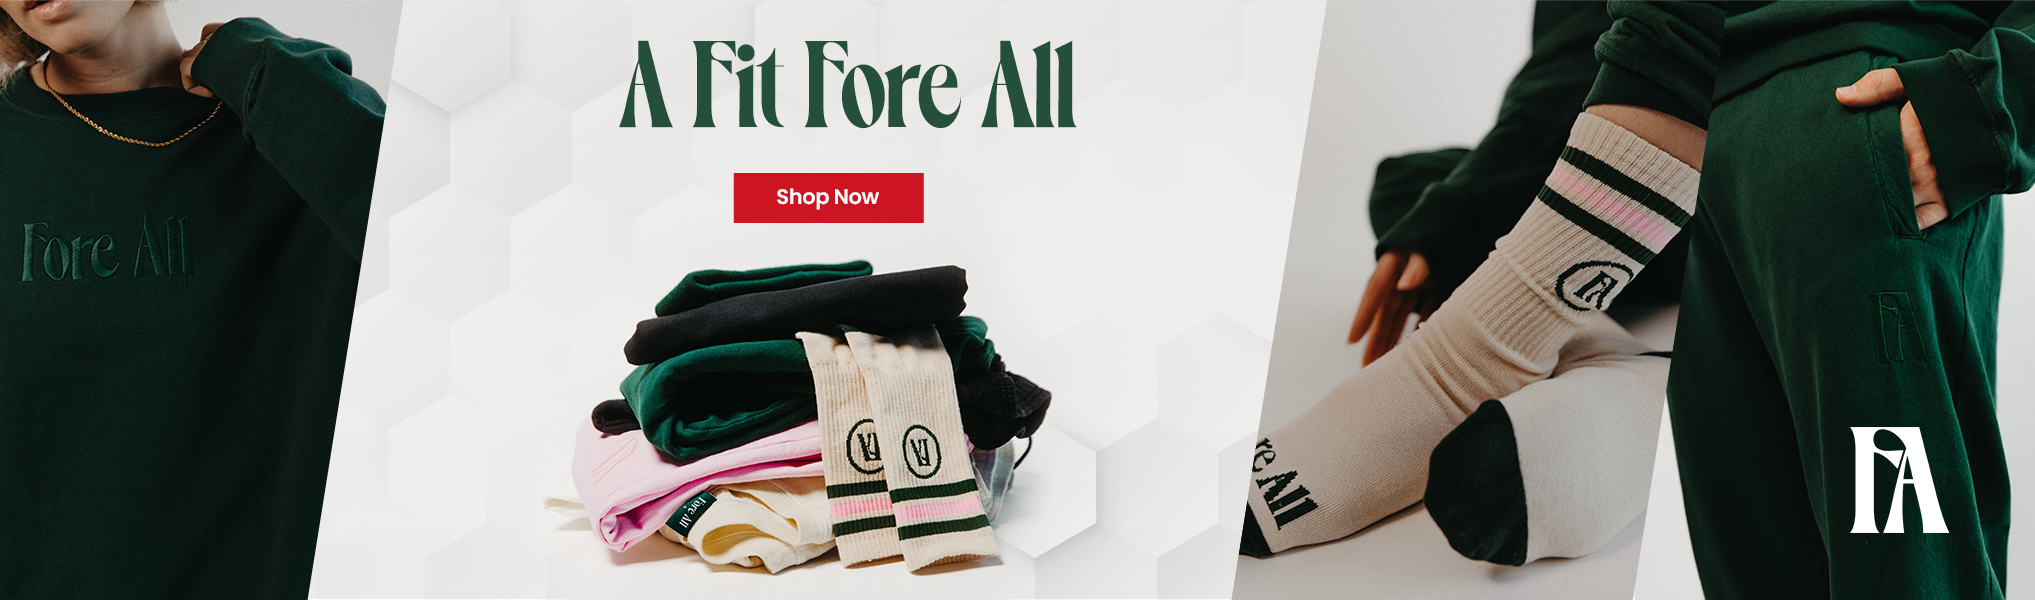 Fore All Apparel